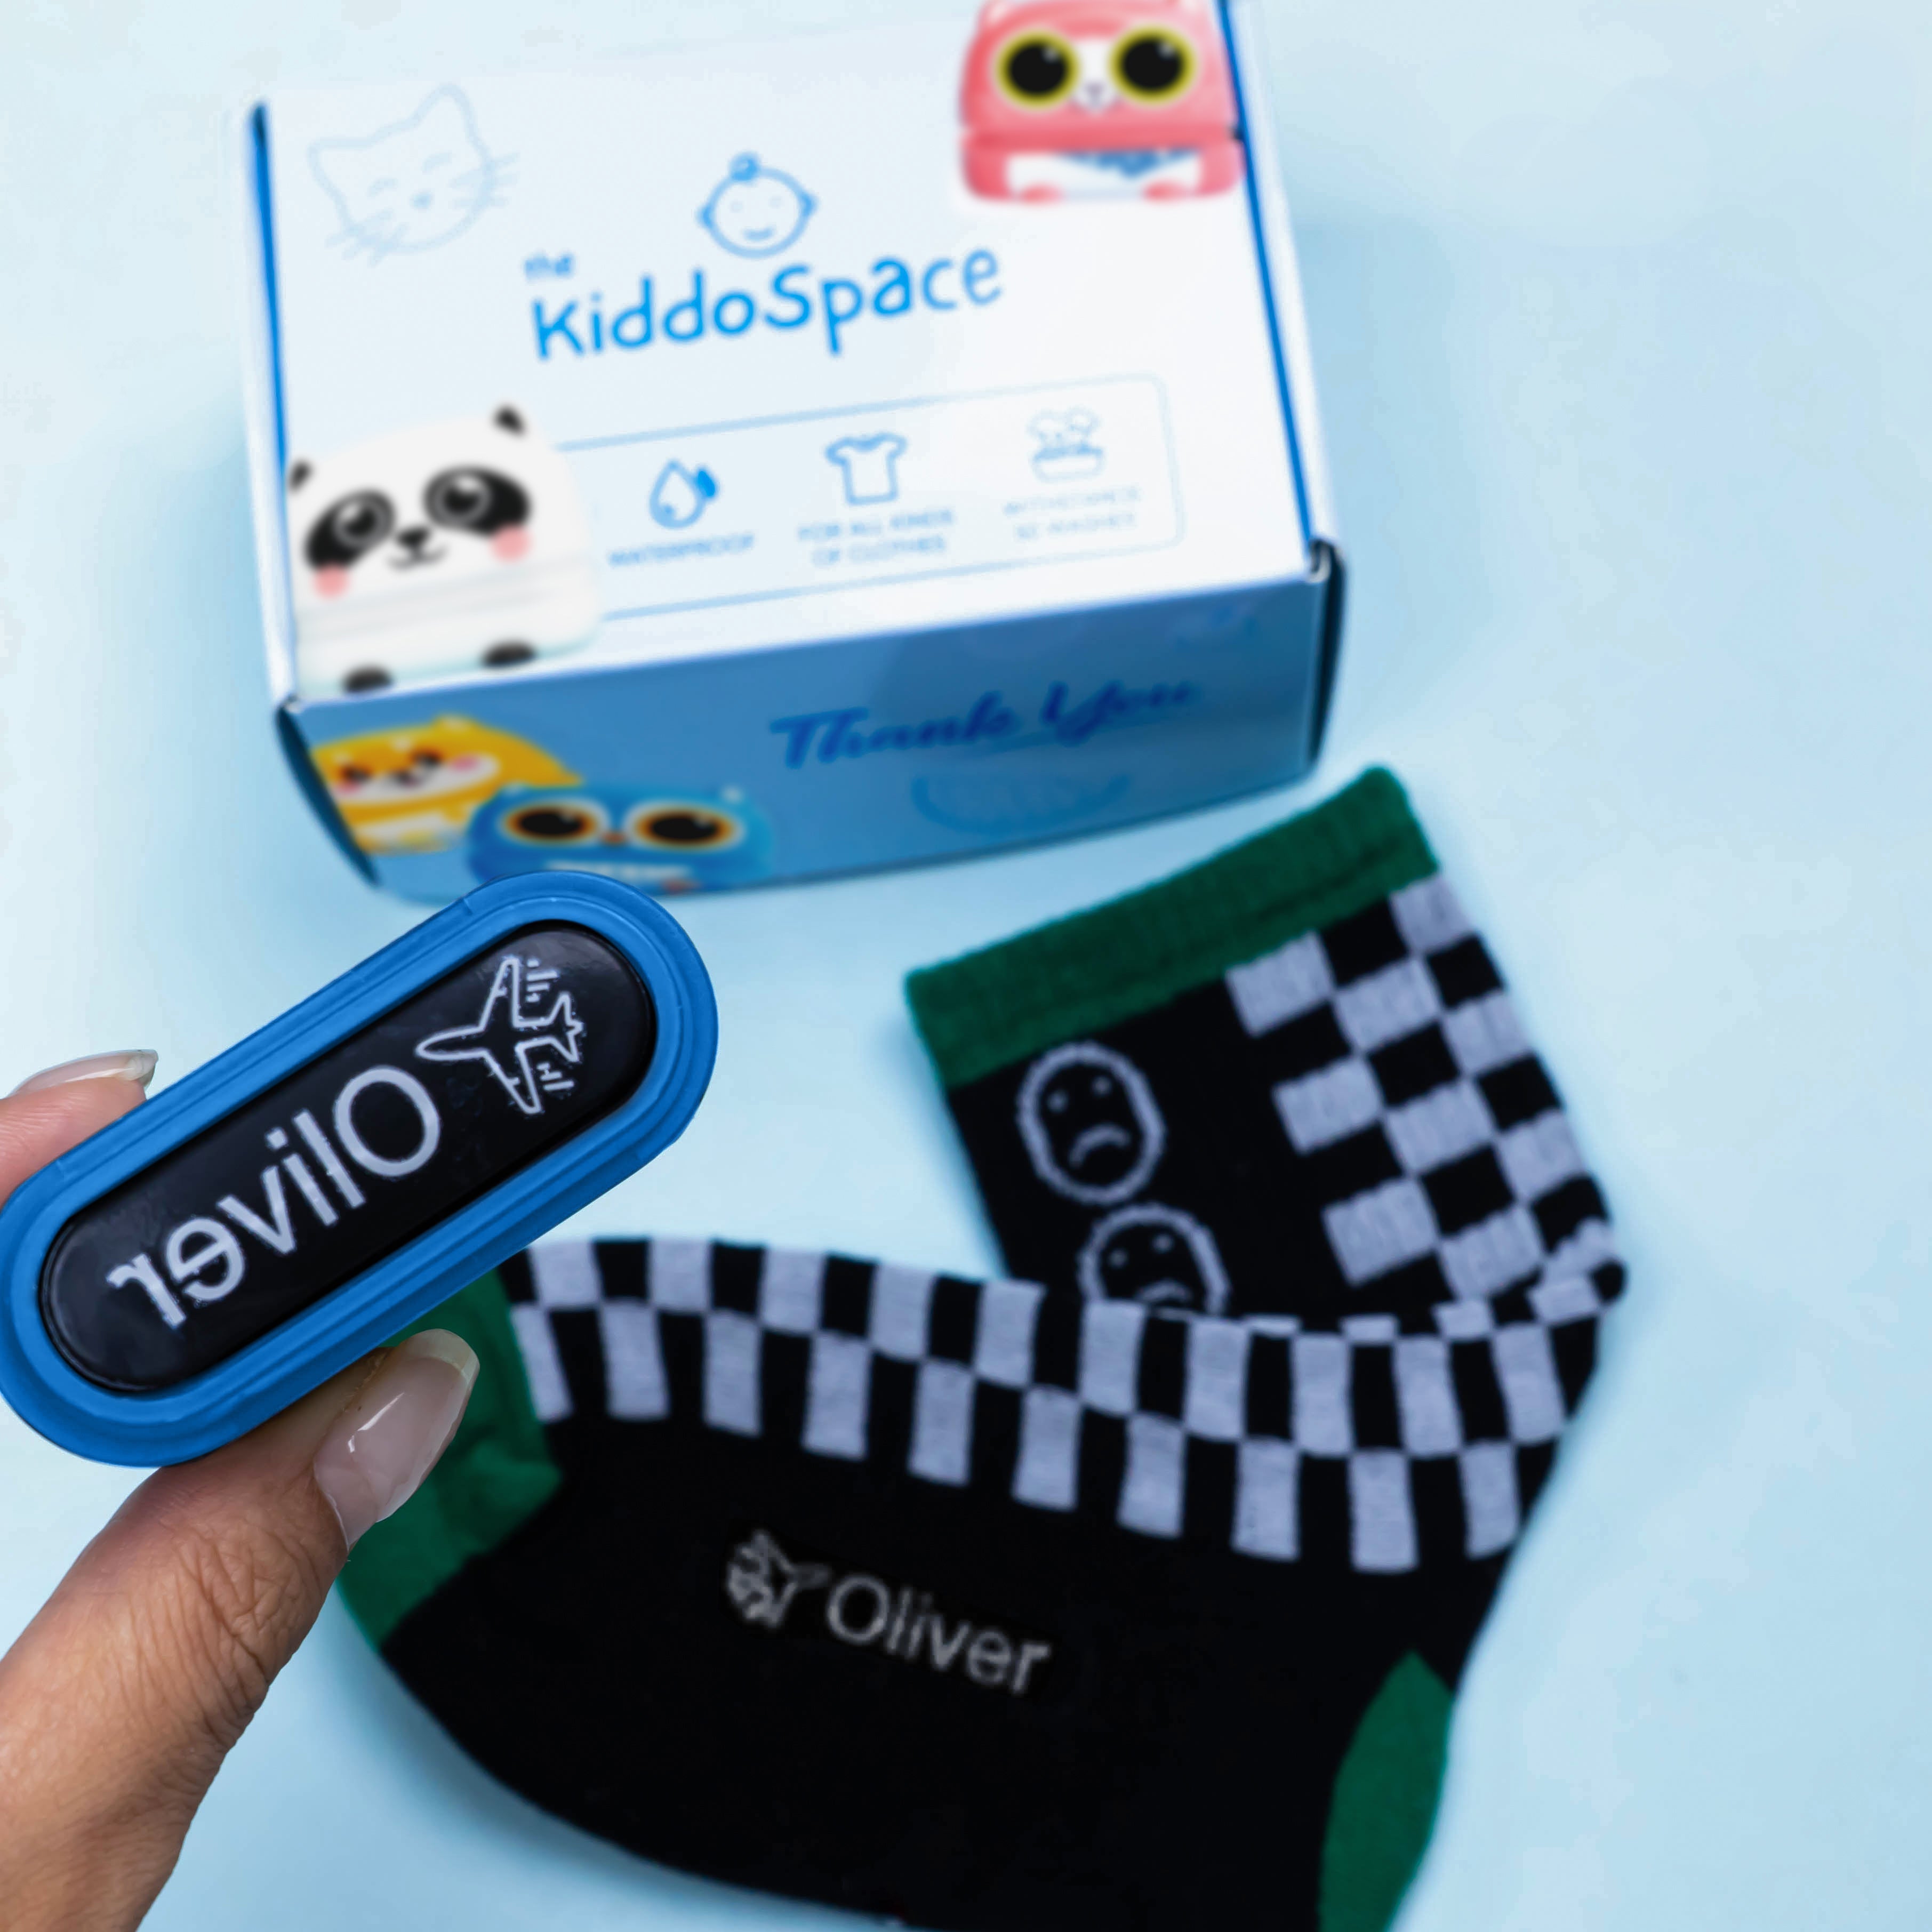 Instructions – TheKiddoSpace SG  Name Stamps for Clothes, Organizers & Toys